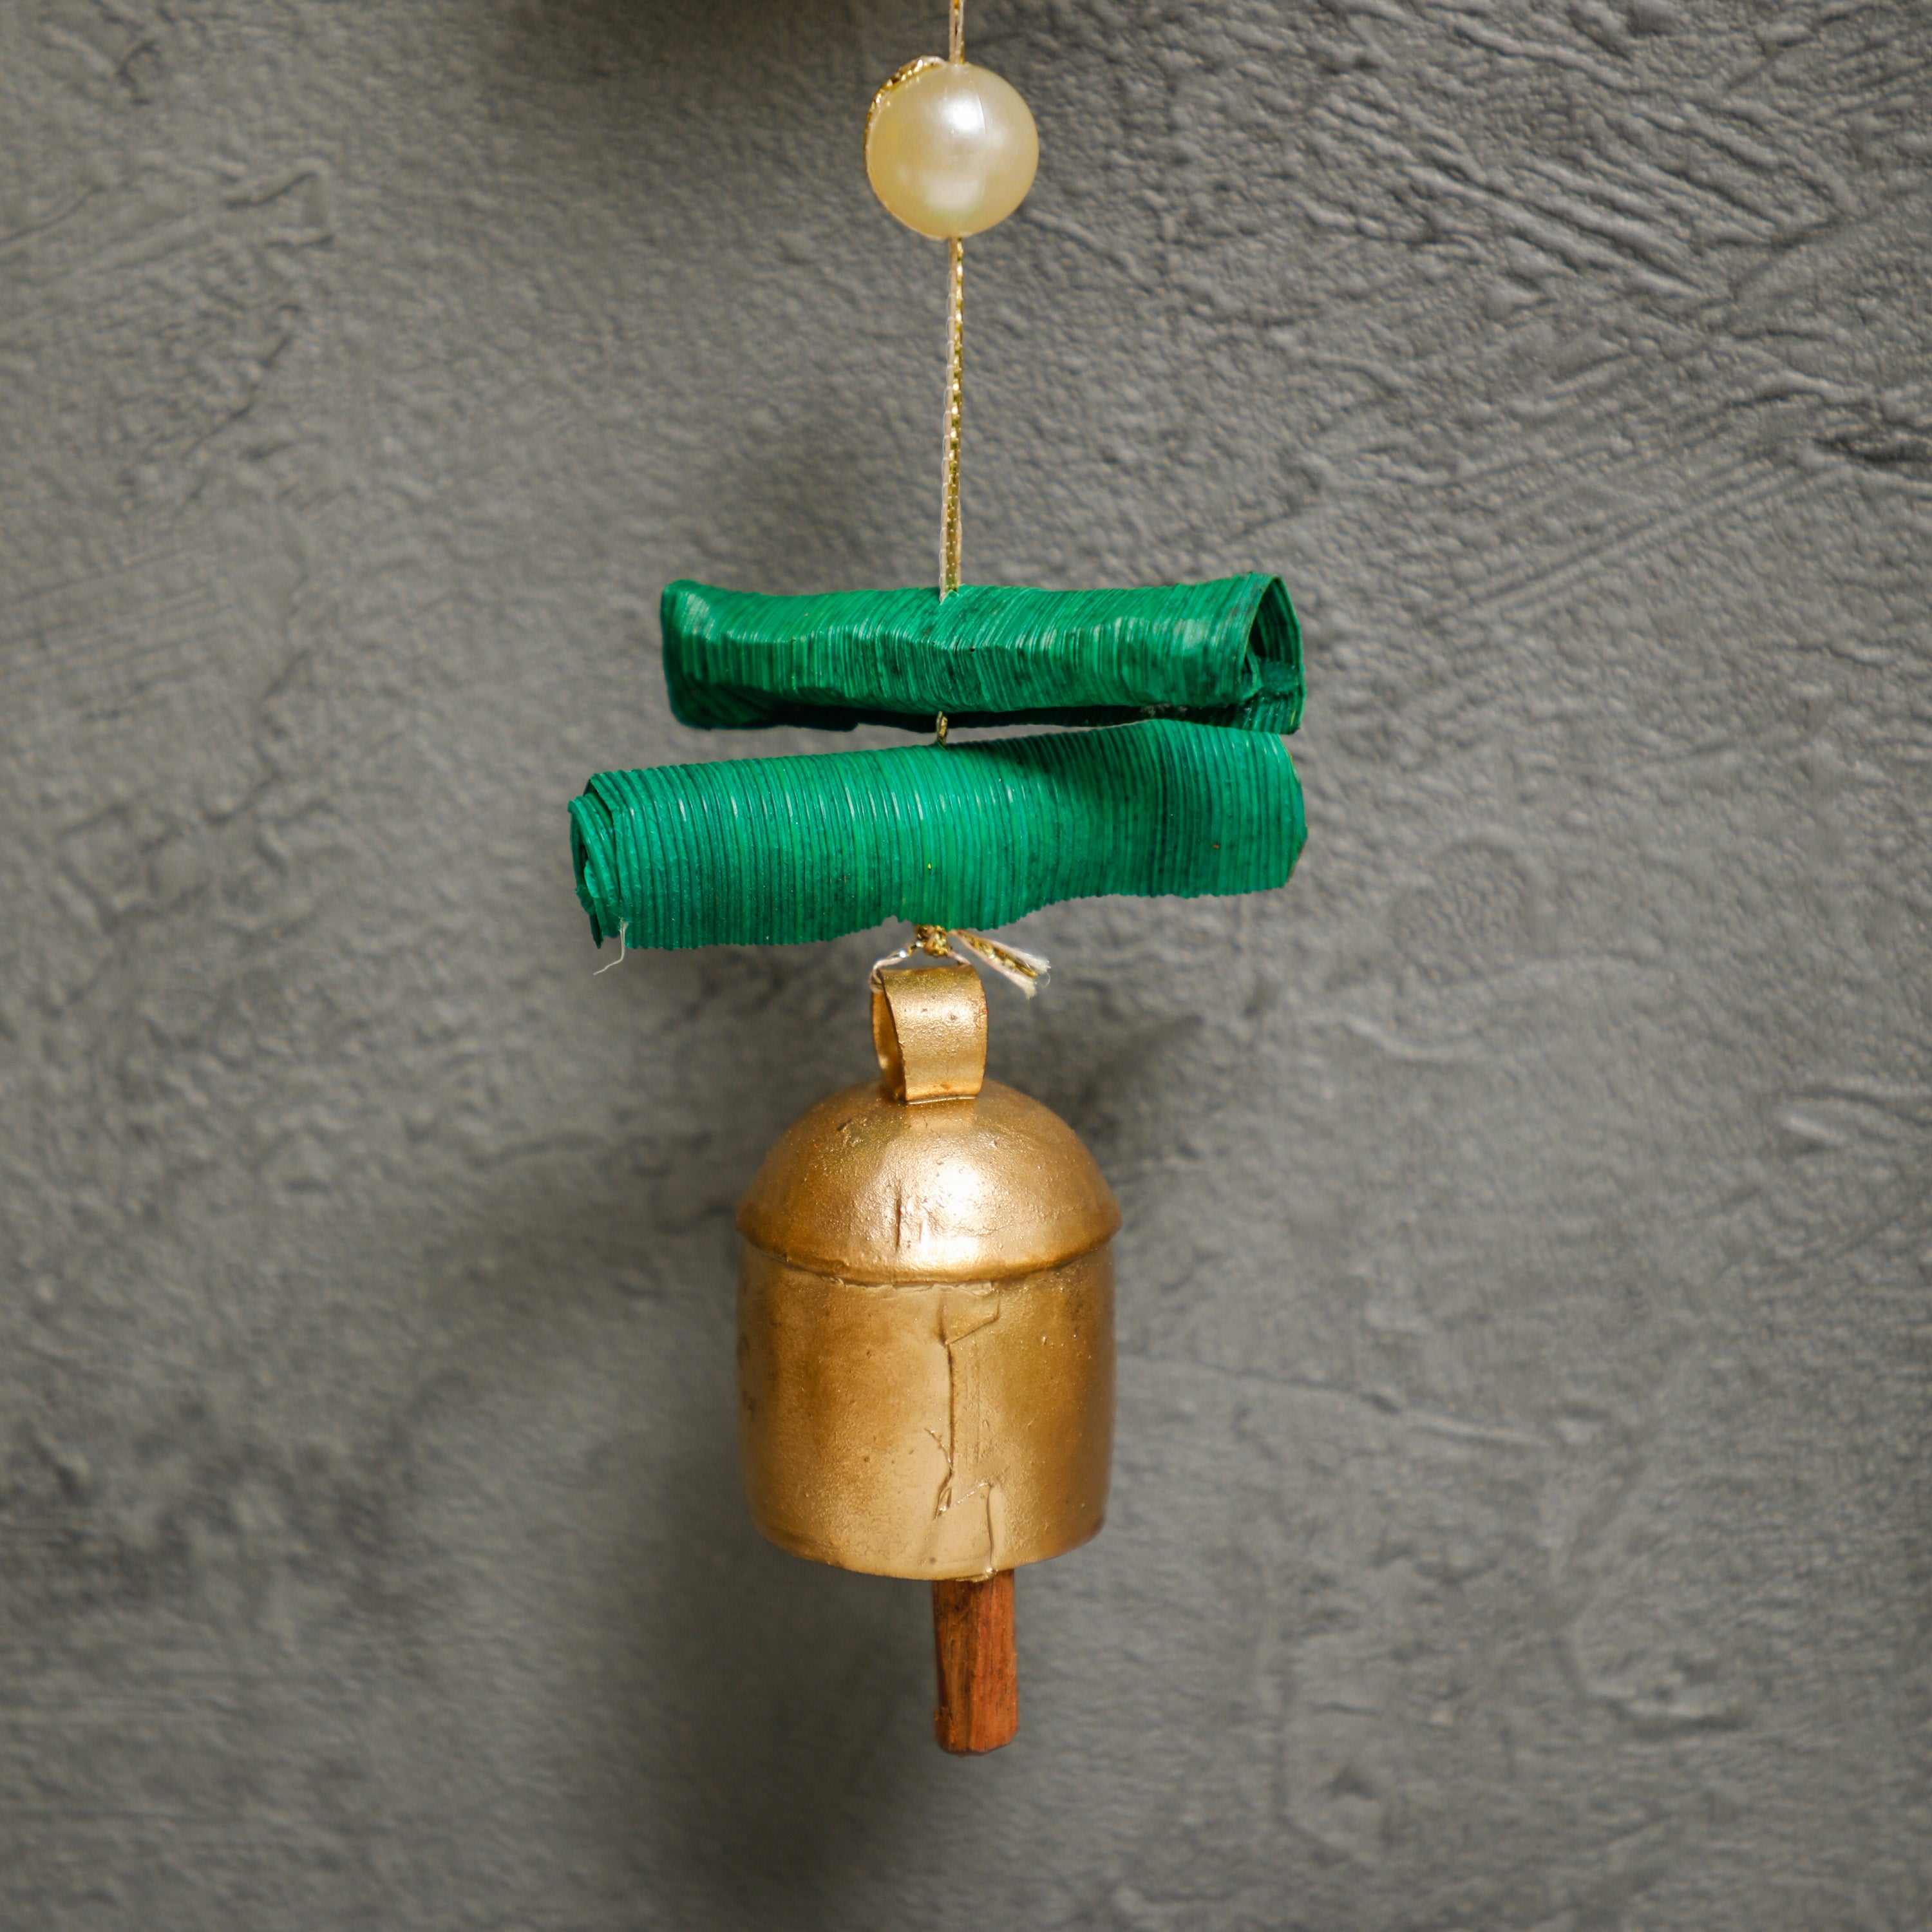 Metal bell is attached at the end of the garland